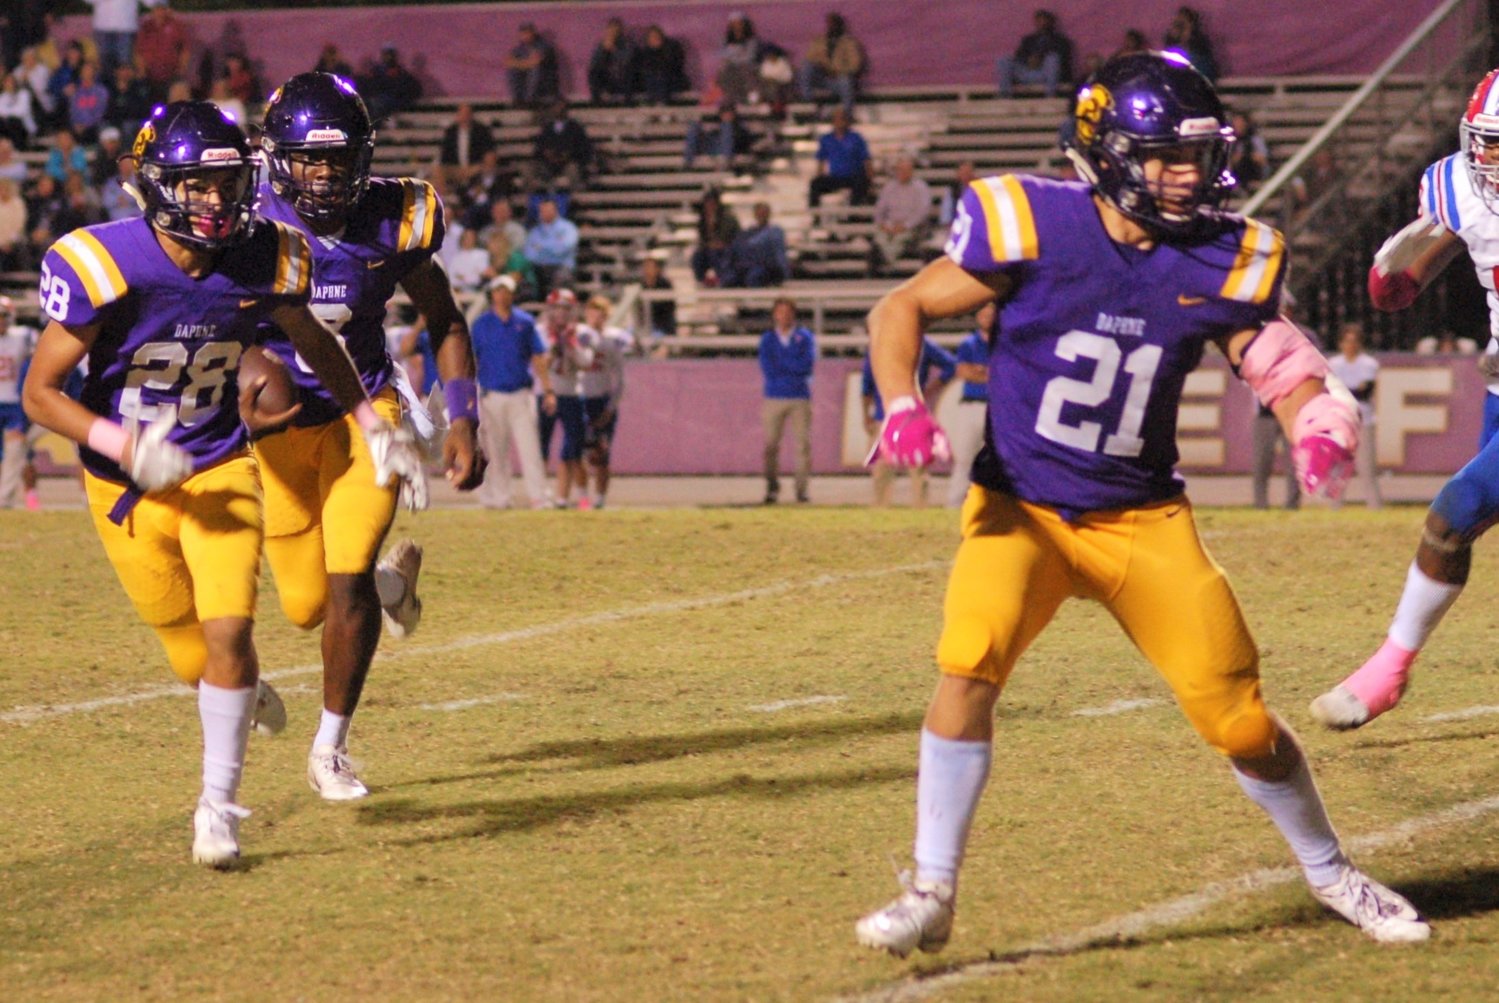 Daphne junior Trent Battle gets lead blocking from Veontai Williams (28) and Davis Oliver (21) during the Trojans’ Class 6A Region 1 game against St. Paul’s Episcopal at Jubilee Stadium Oct. 24, 2019. Now a full-time running back for the TCU Horned Frogs, Battle will have a chance to become the third former Trojan to play in the national championship game in the last 10 years.